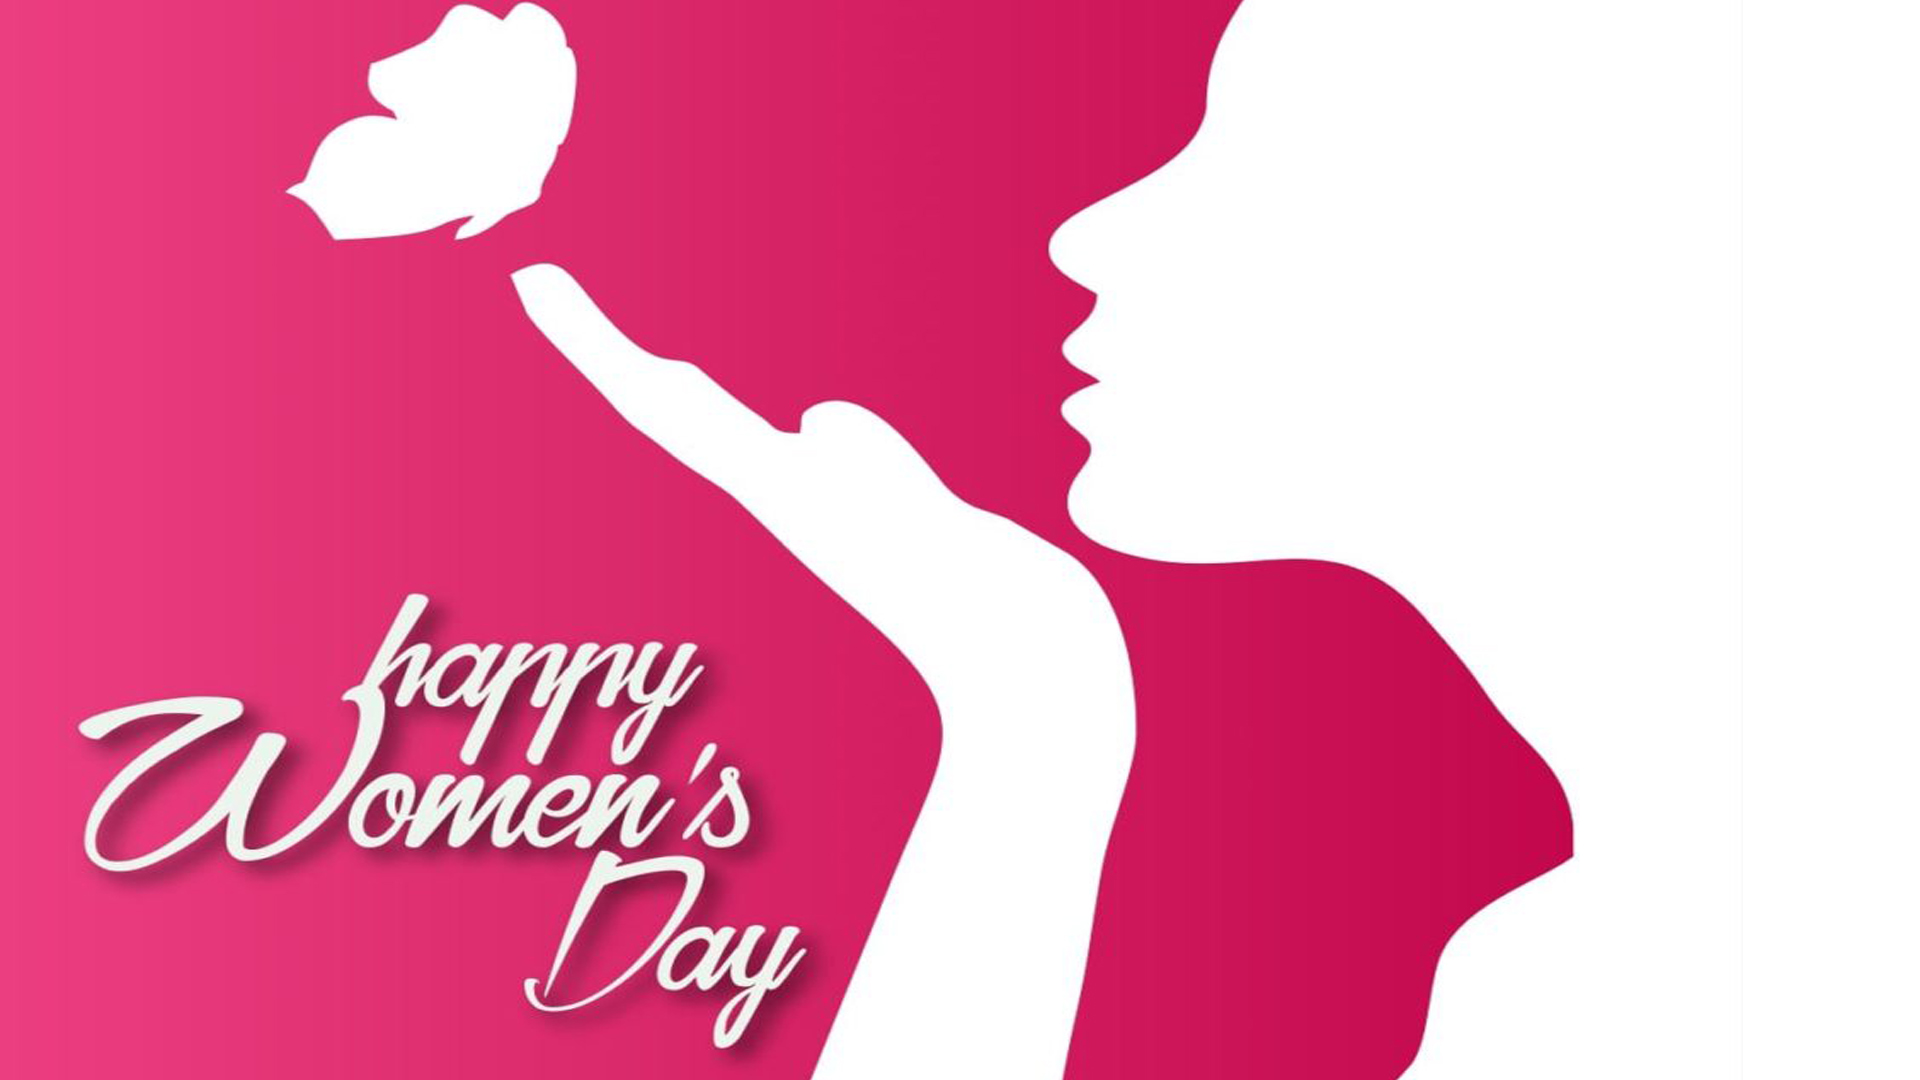 Happy Womens Day Images | Women's Day Wishes